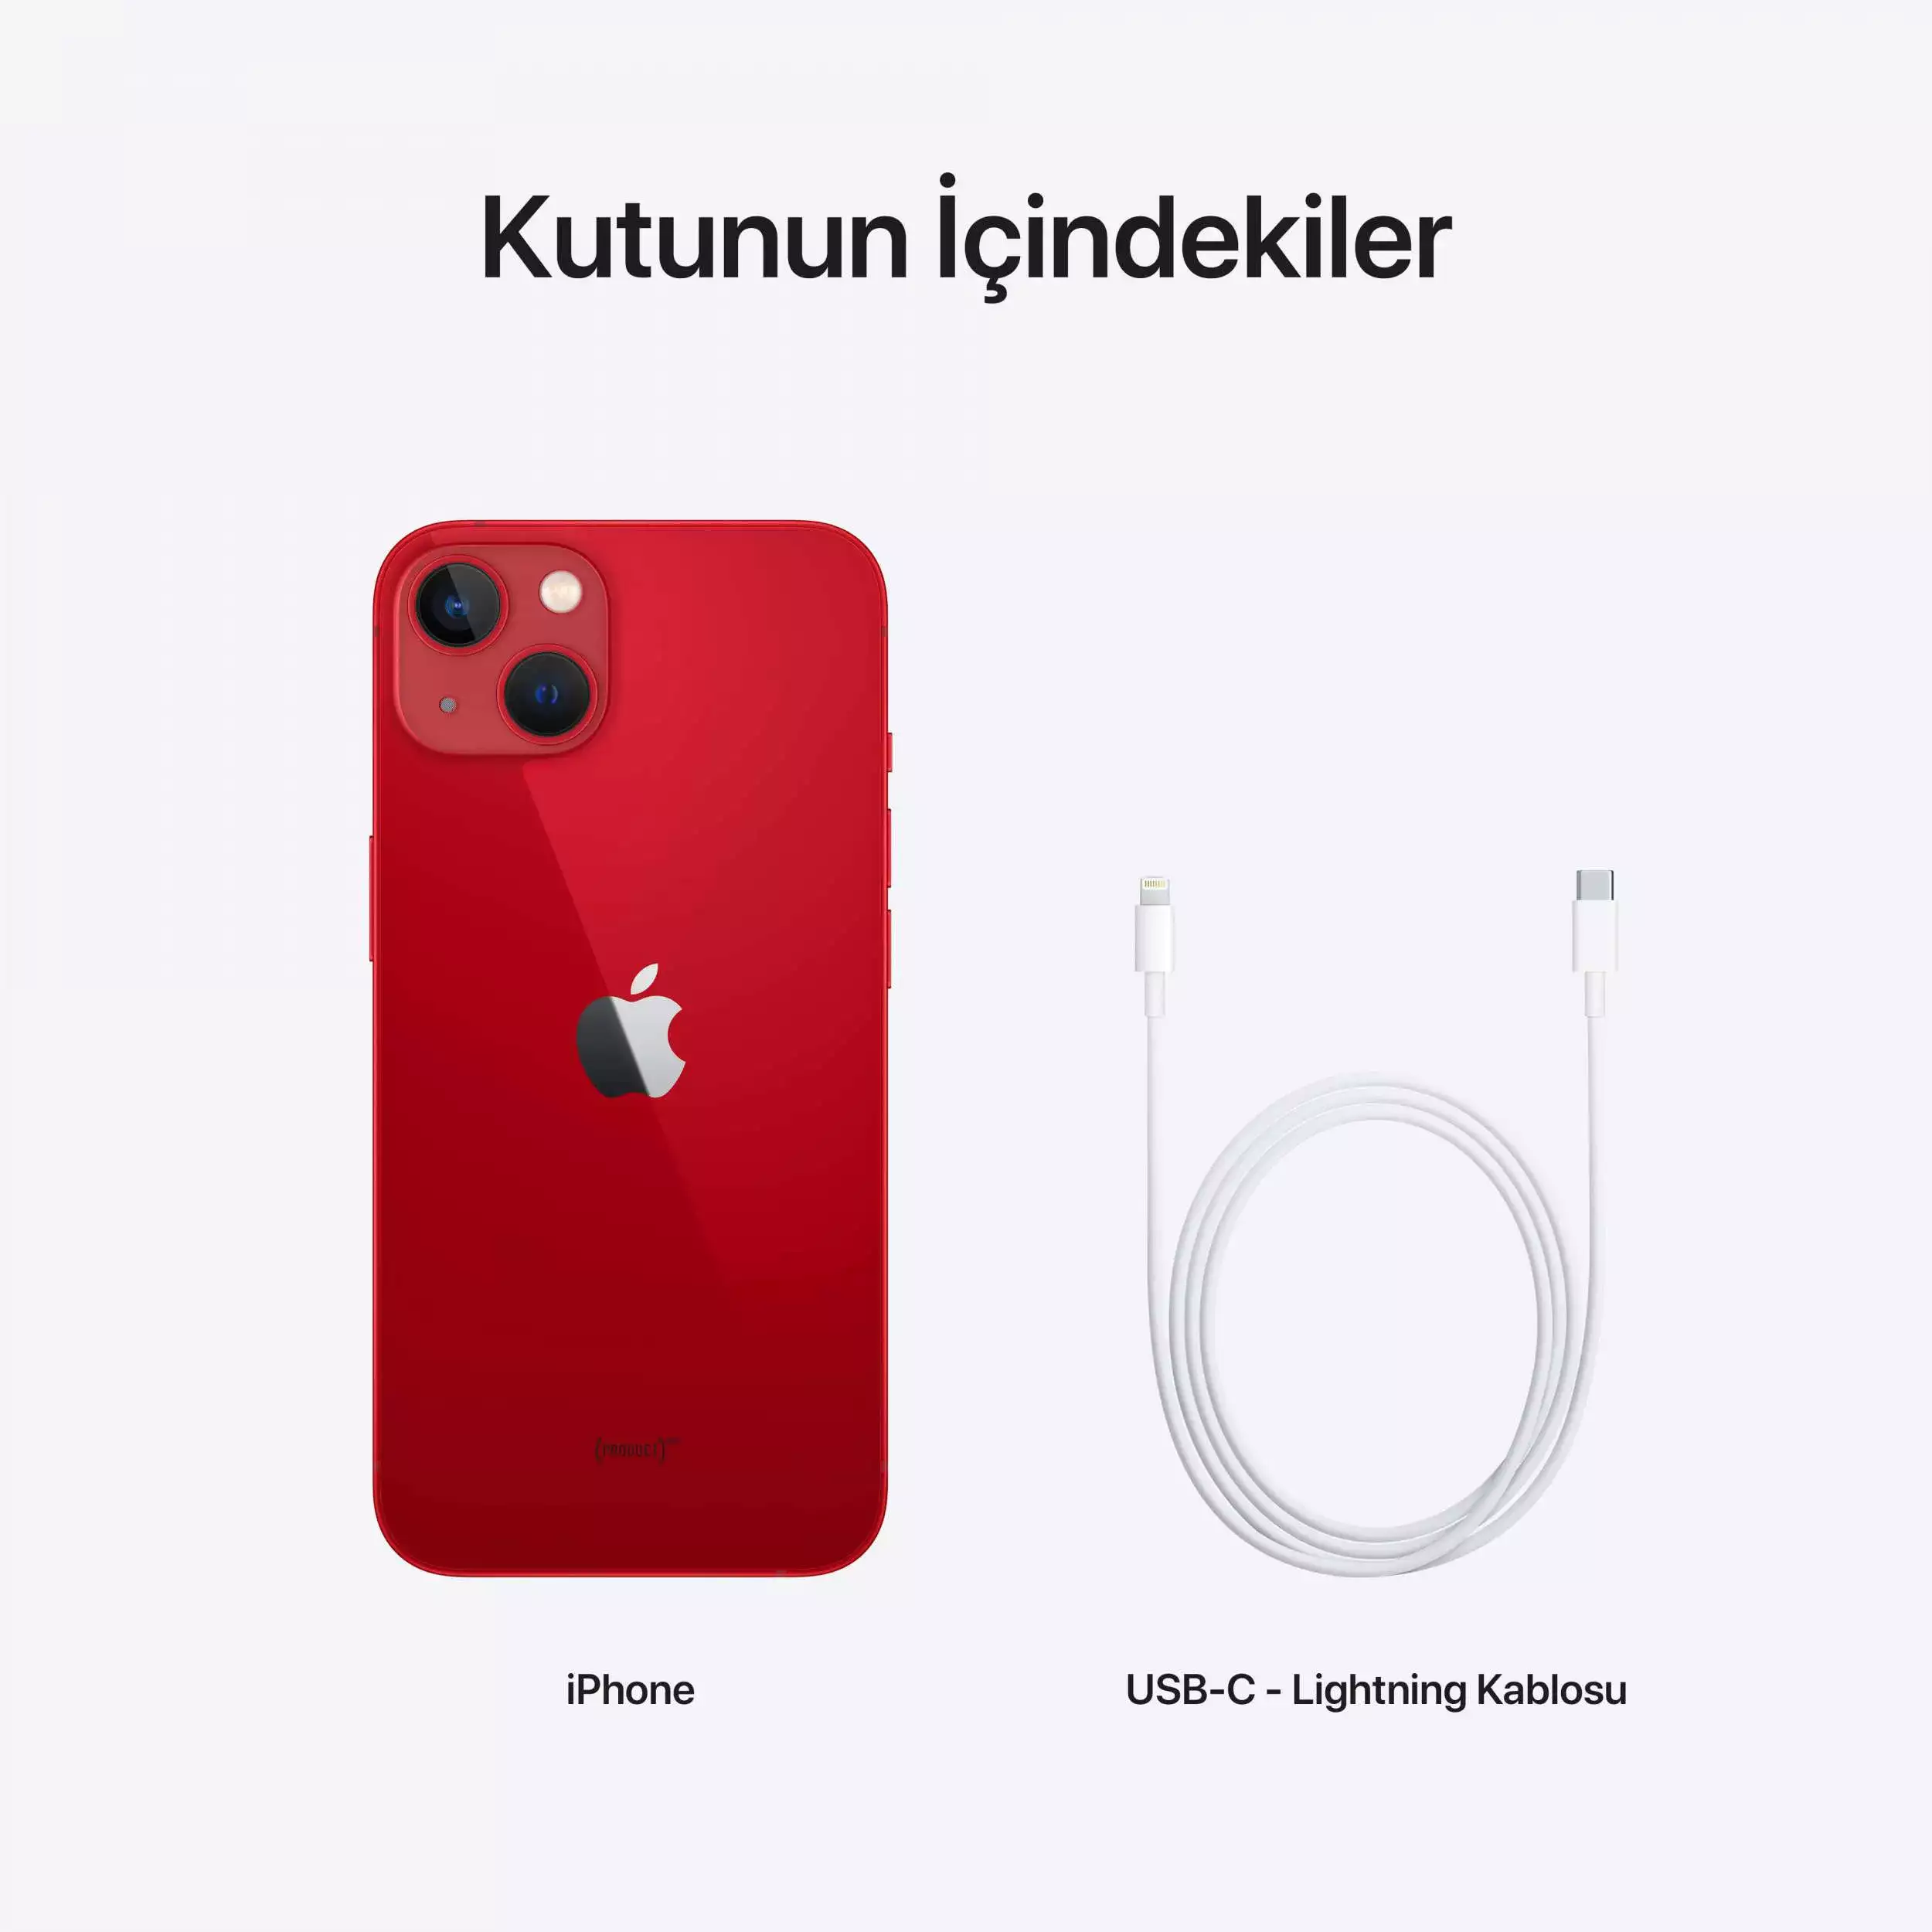 iPhone 13 128GB (Product) RED MLPJ3TU/A